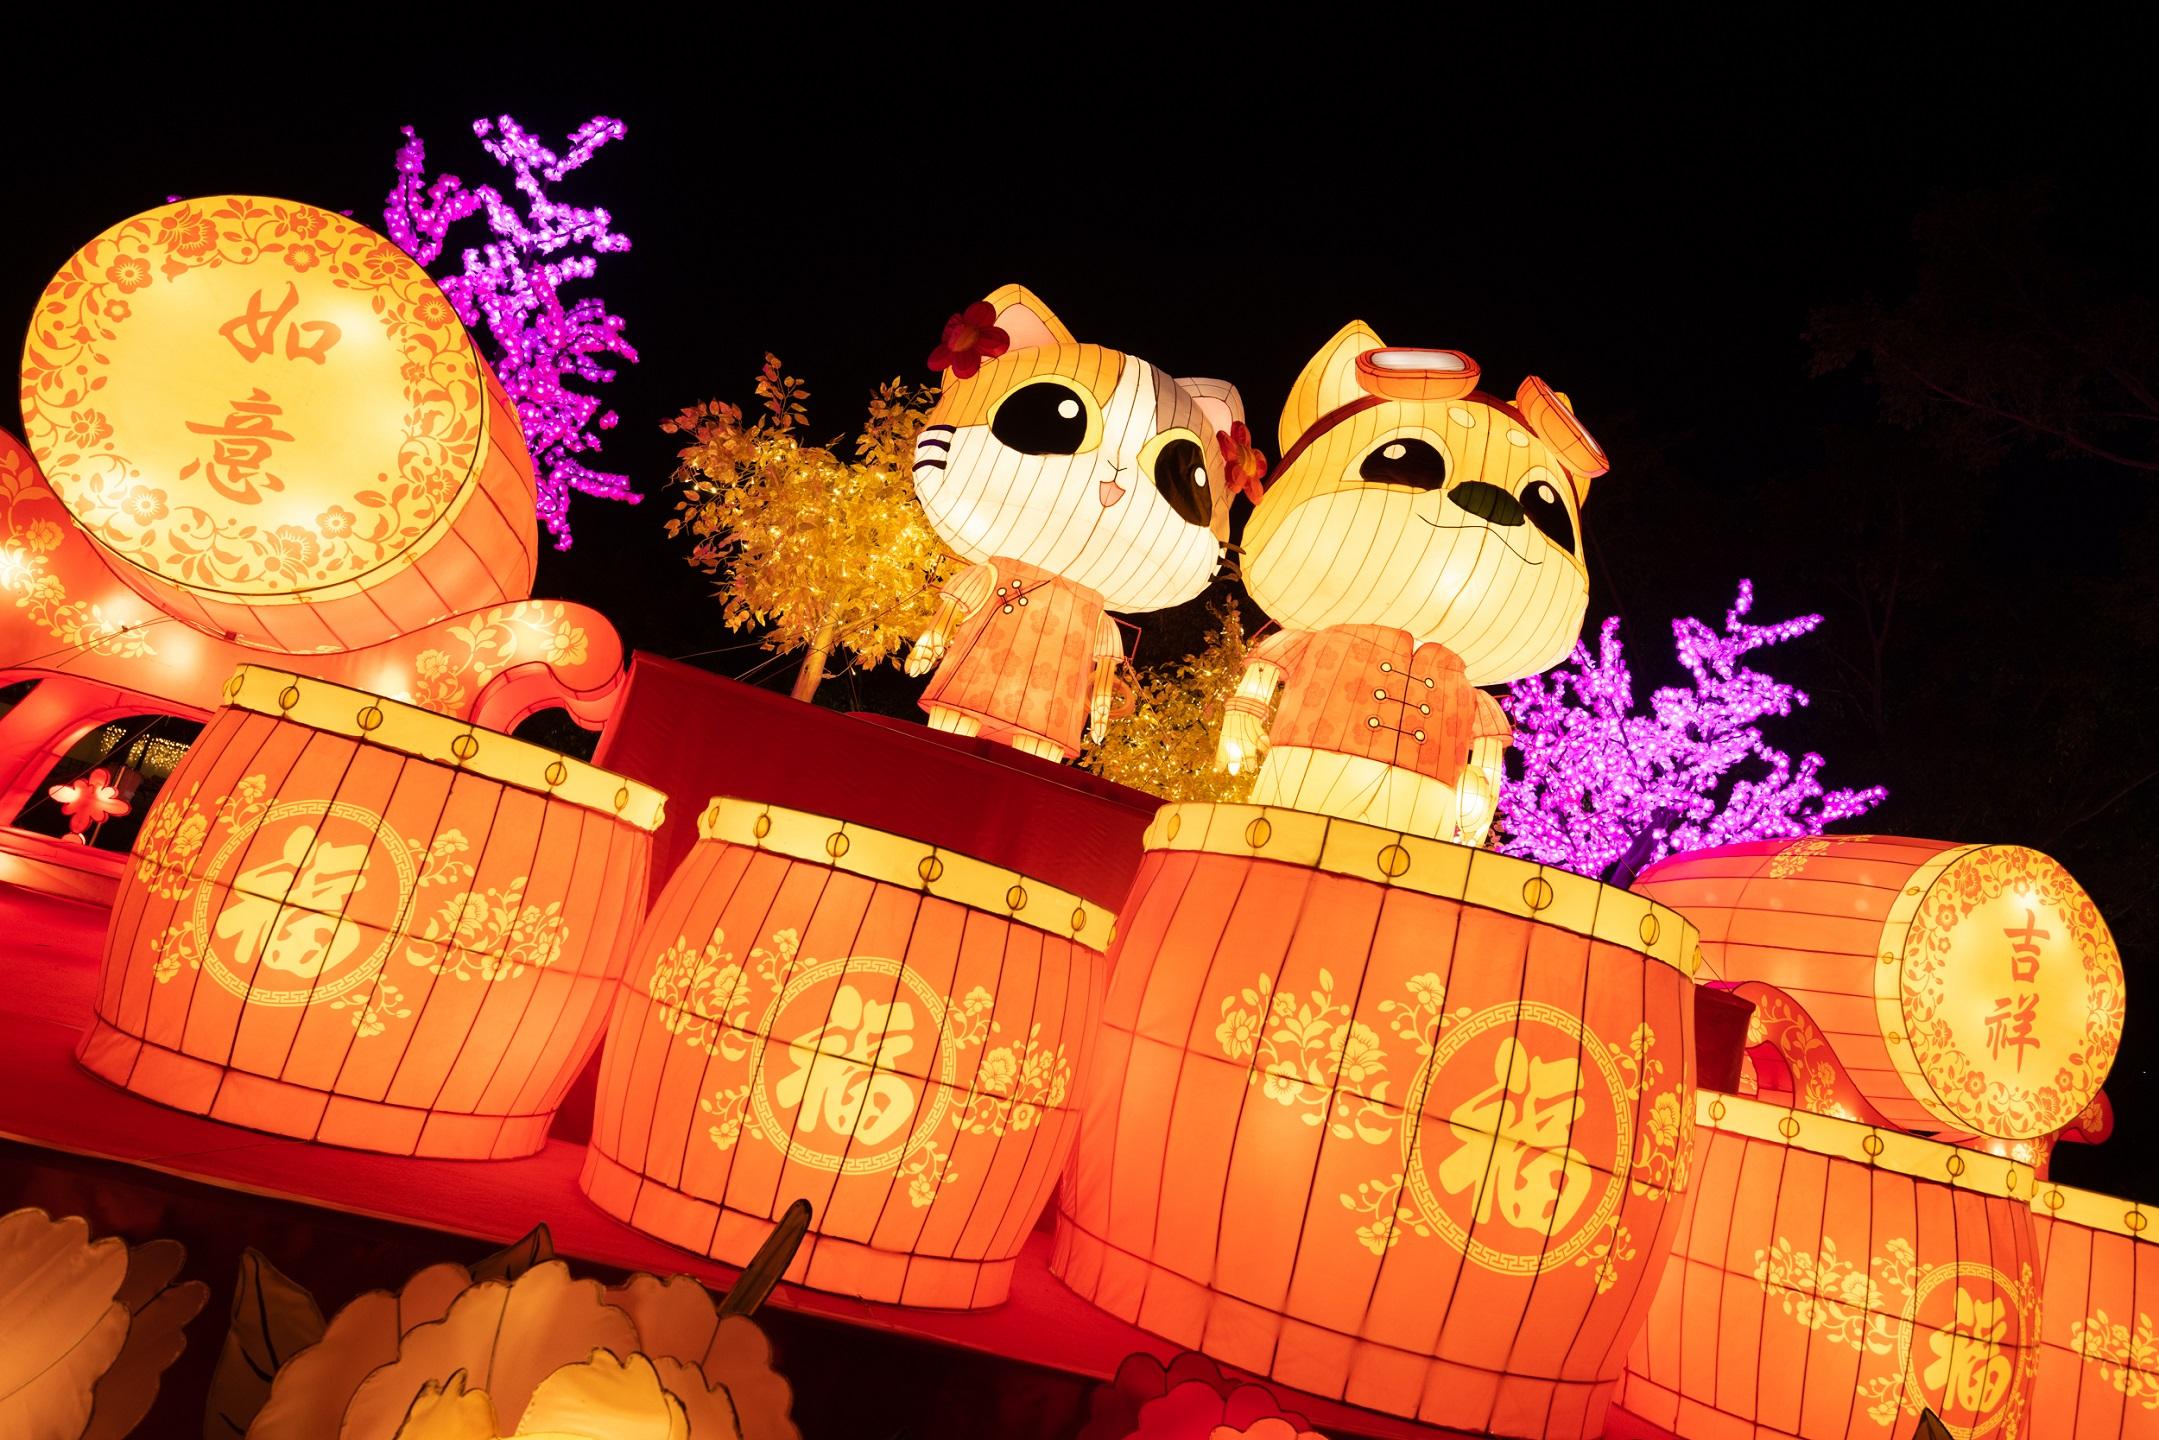 The Leisure and Cultural Services Department (LCSD) will present the Lunar New Year Lantern Displays at both North District Park and Tsuen Wan Park from today (January 31). The displays will last until February 7 and admission is free. Photo shows the New Territories East Lunar New Year Lantern Displays at North District Park. Under the theme of "Spring is in the air", the displays will feature lanterns in the shapes of flowers, animals and insects in dazzling colours, which bear the message of rebirth. The displays also include lanterns of LCSD mascots Enggie Pup and Artti Kitty in traditional Chinese attire.